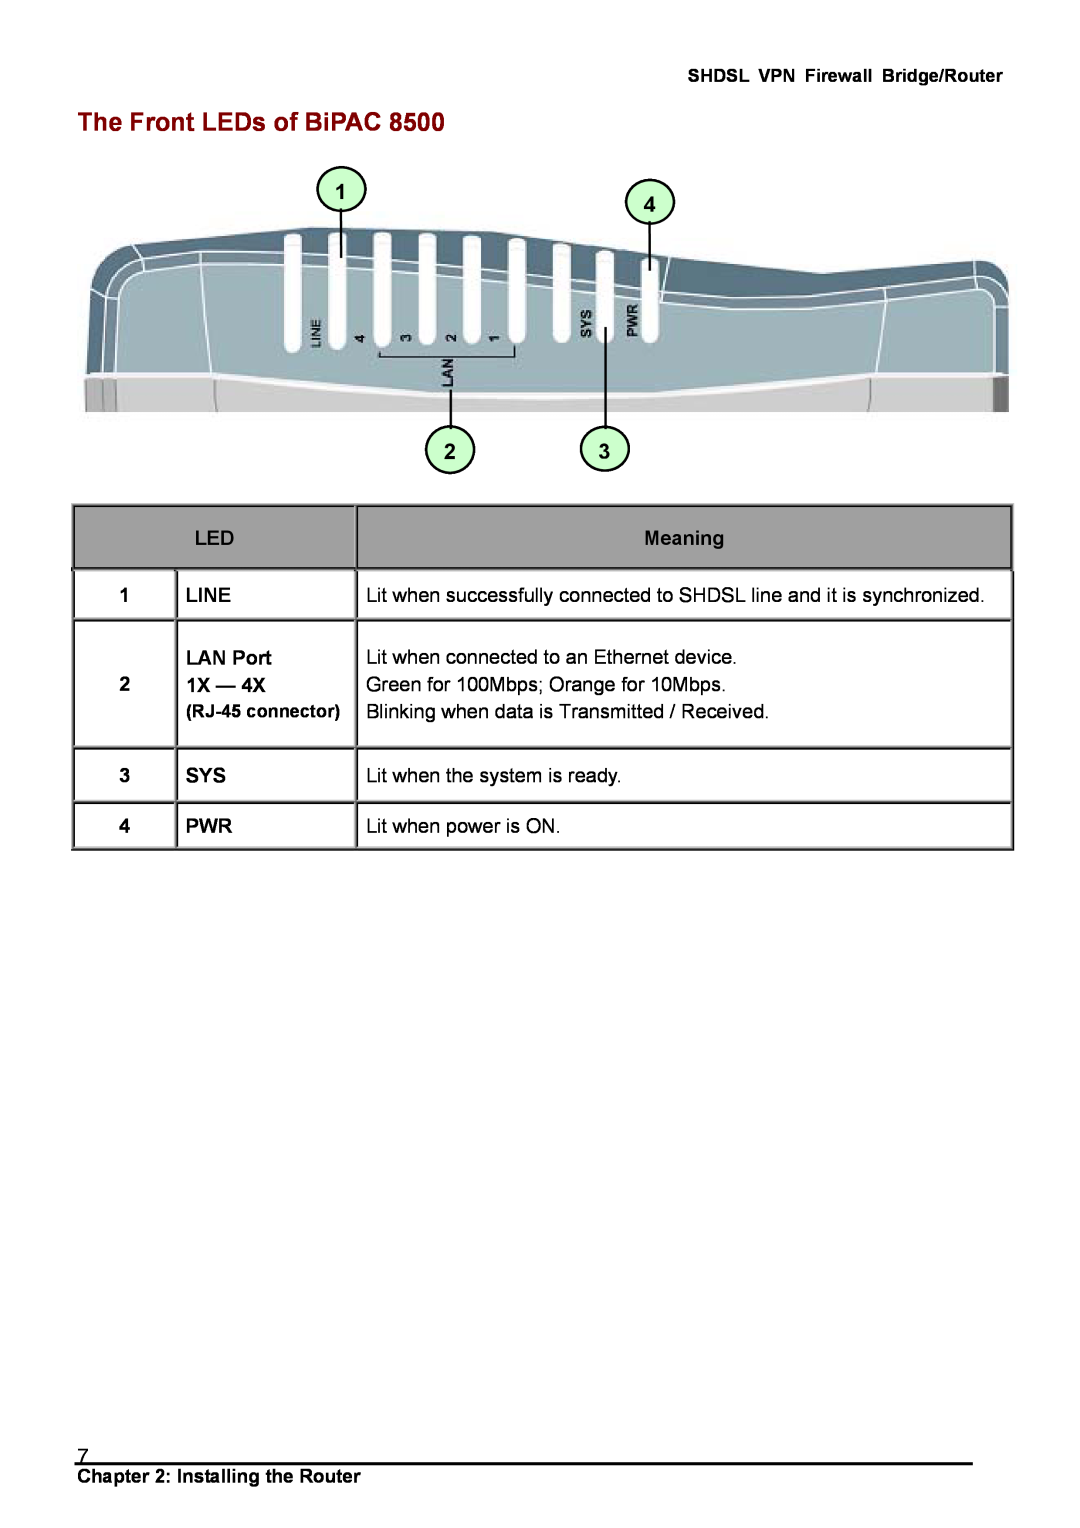 Billion Electric Company 8501 user manual The Front LEDs of BiPAC, LED LINE LAN Port 1X, Meaning, Lit when power is ON 